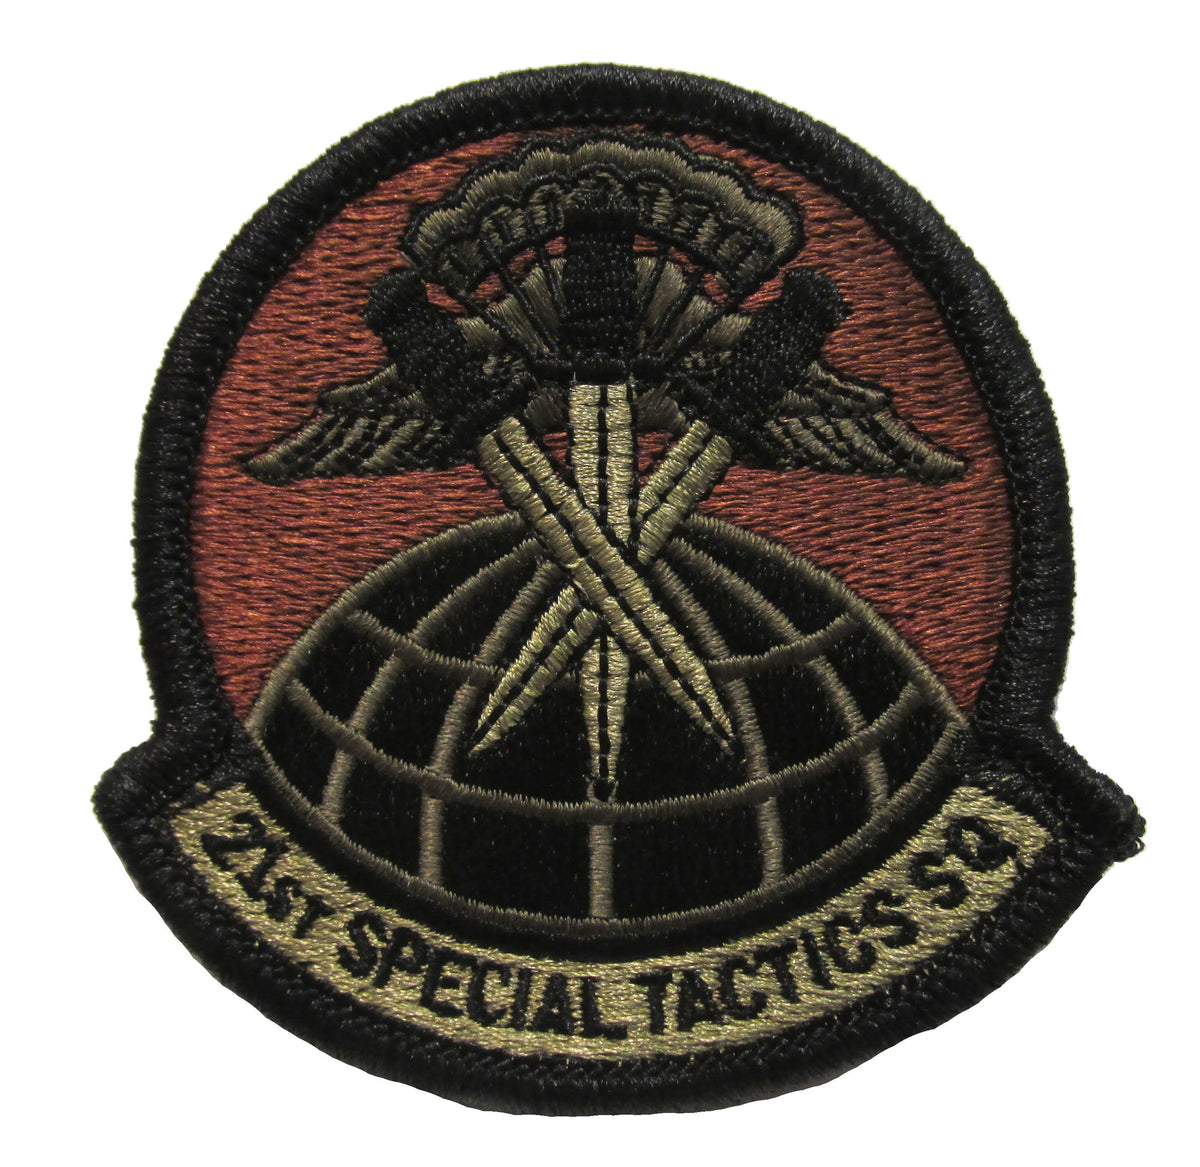 21st Special Tactics Squadron OCP Patch - Spice Brown